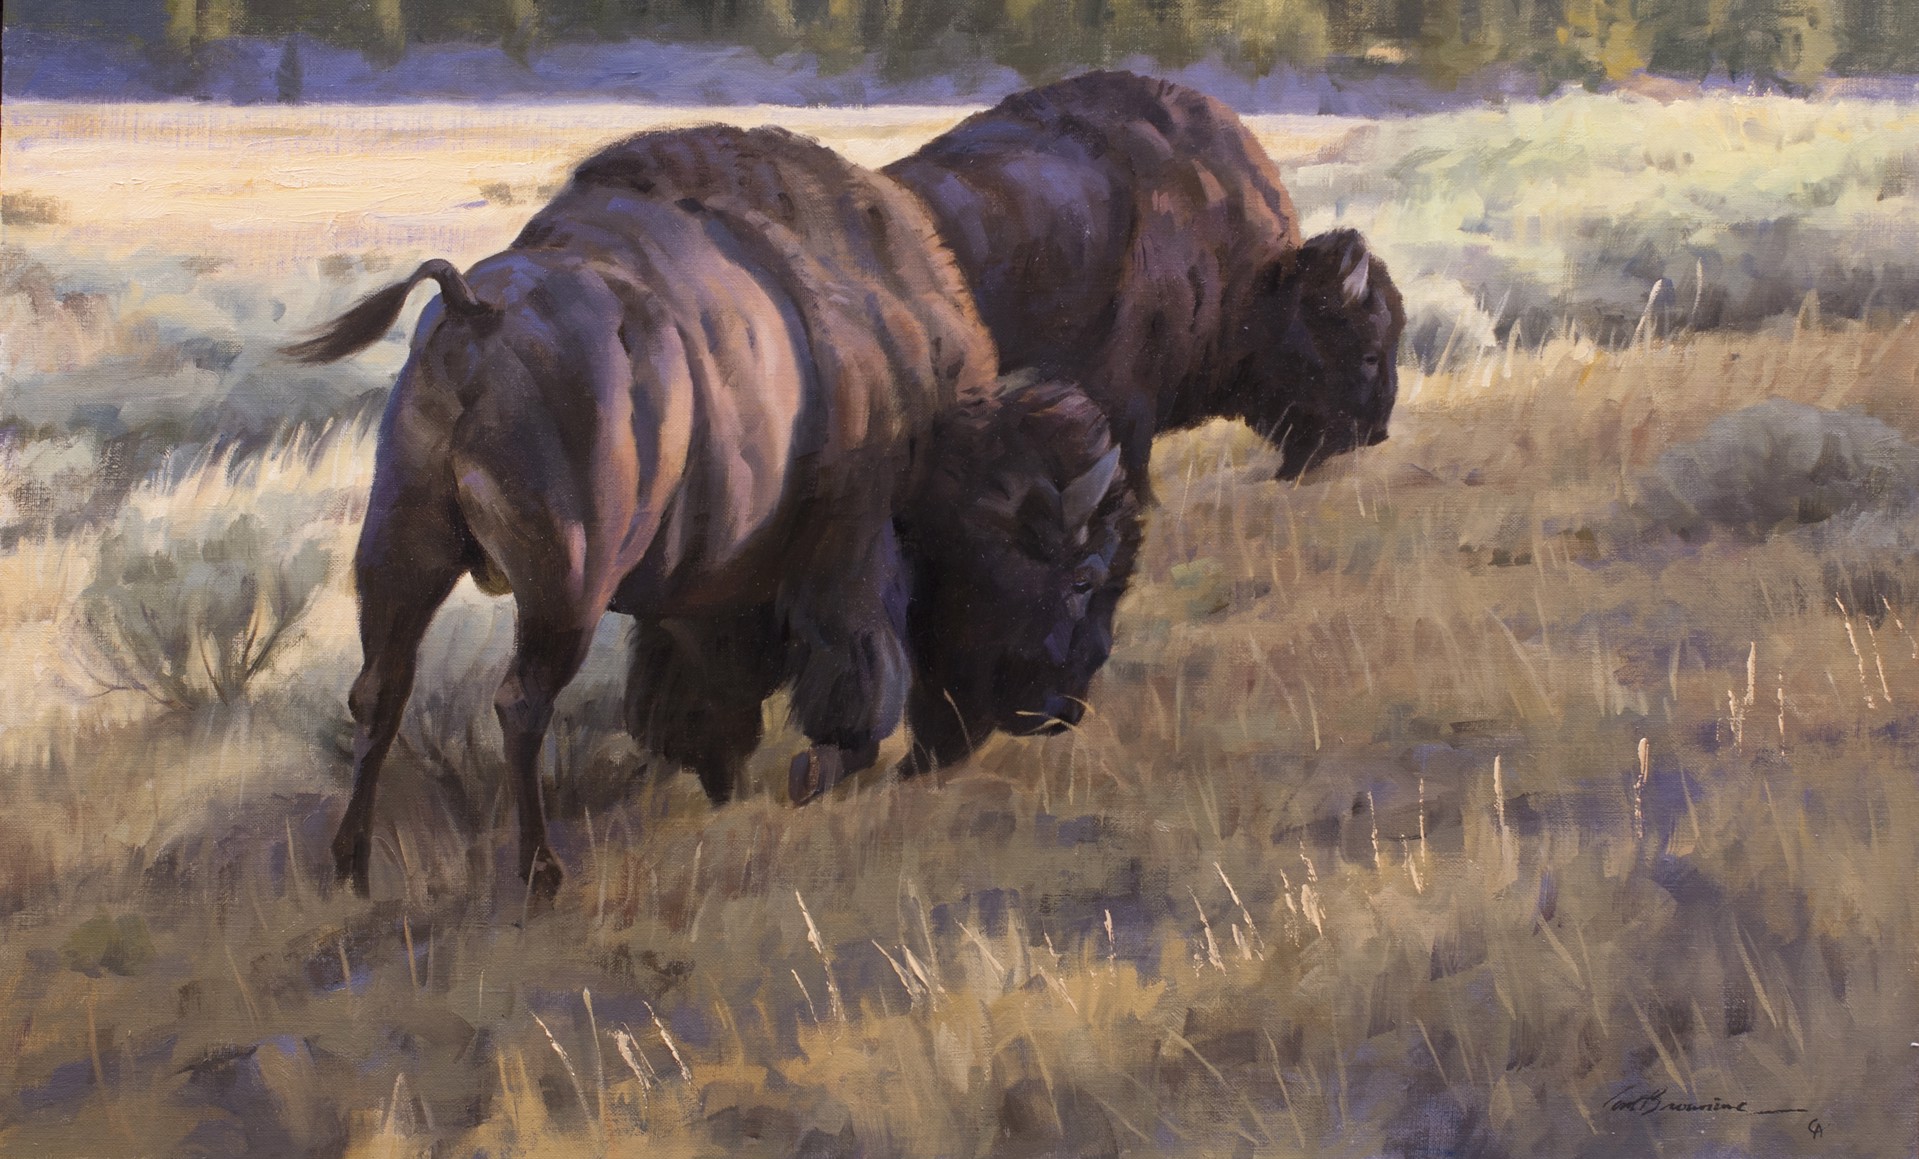 Near the Yellowstone by Tom Browning